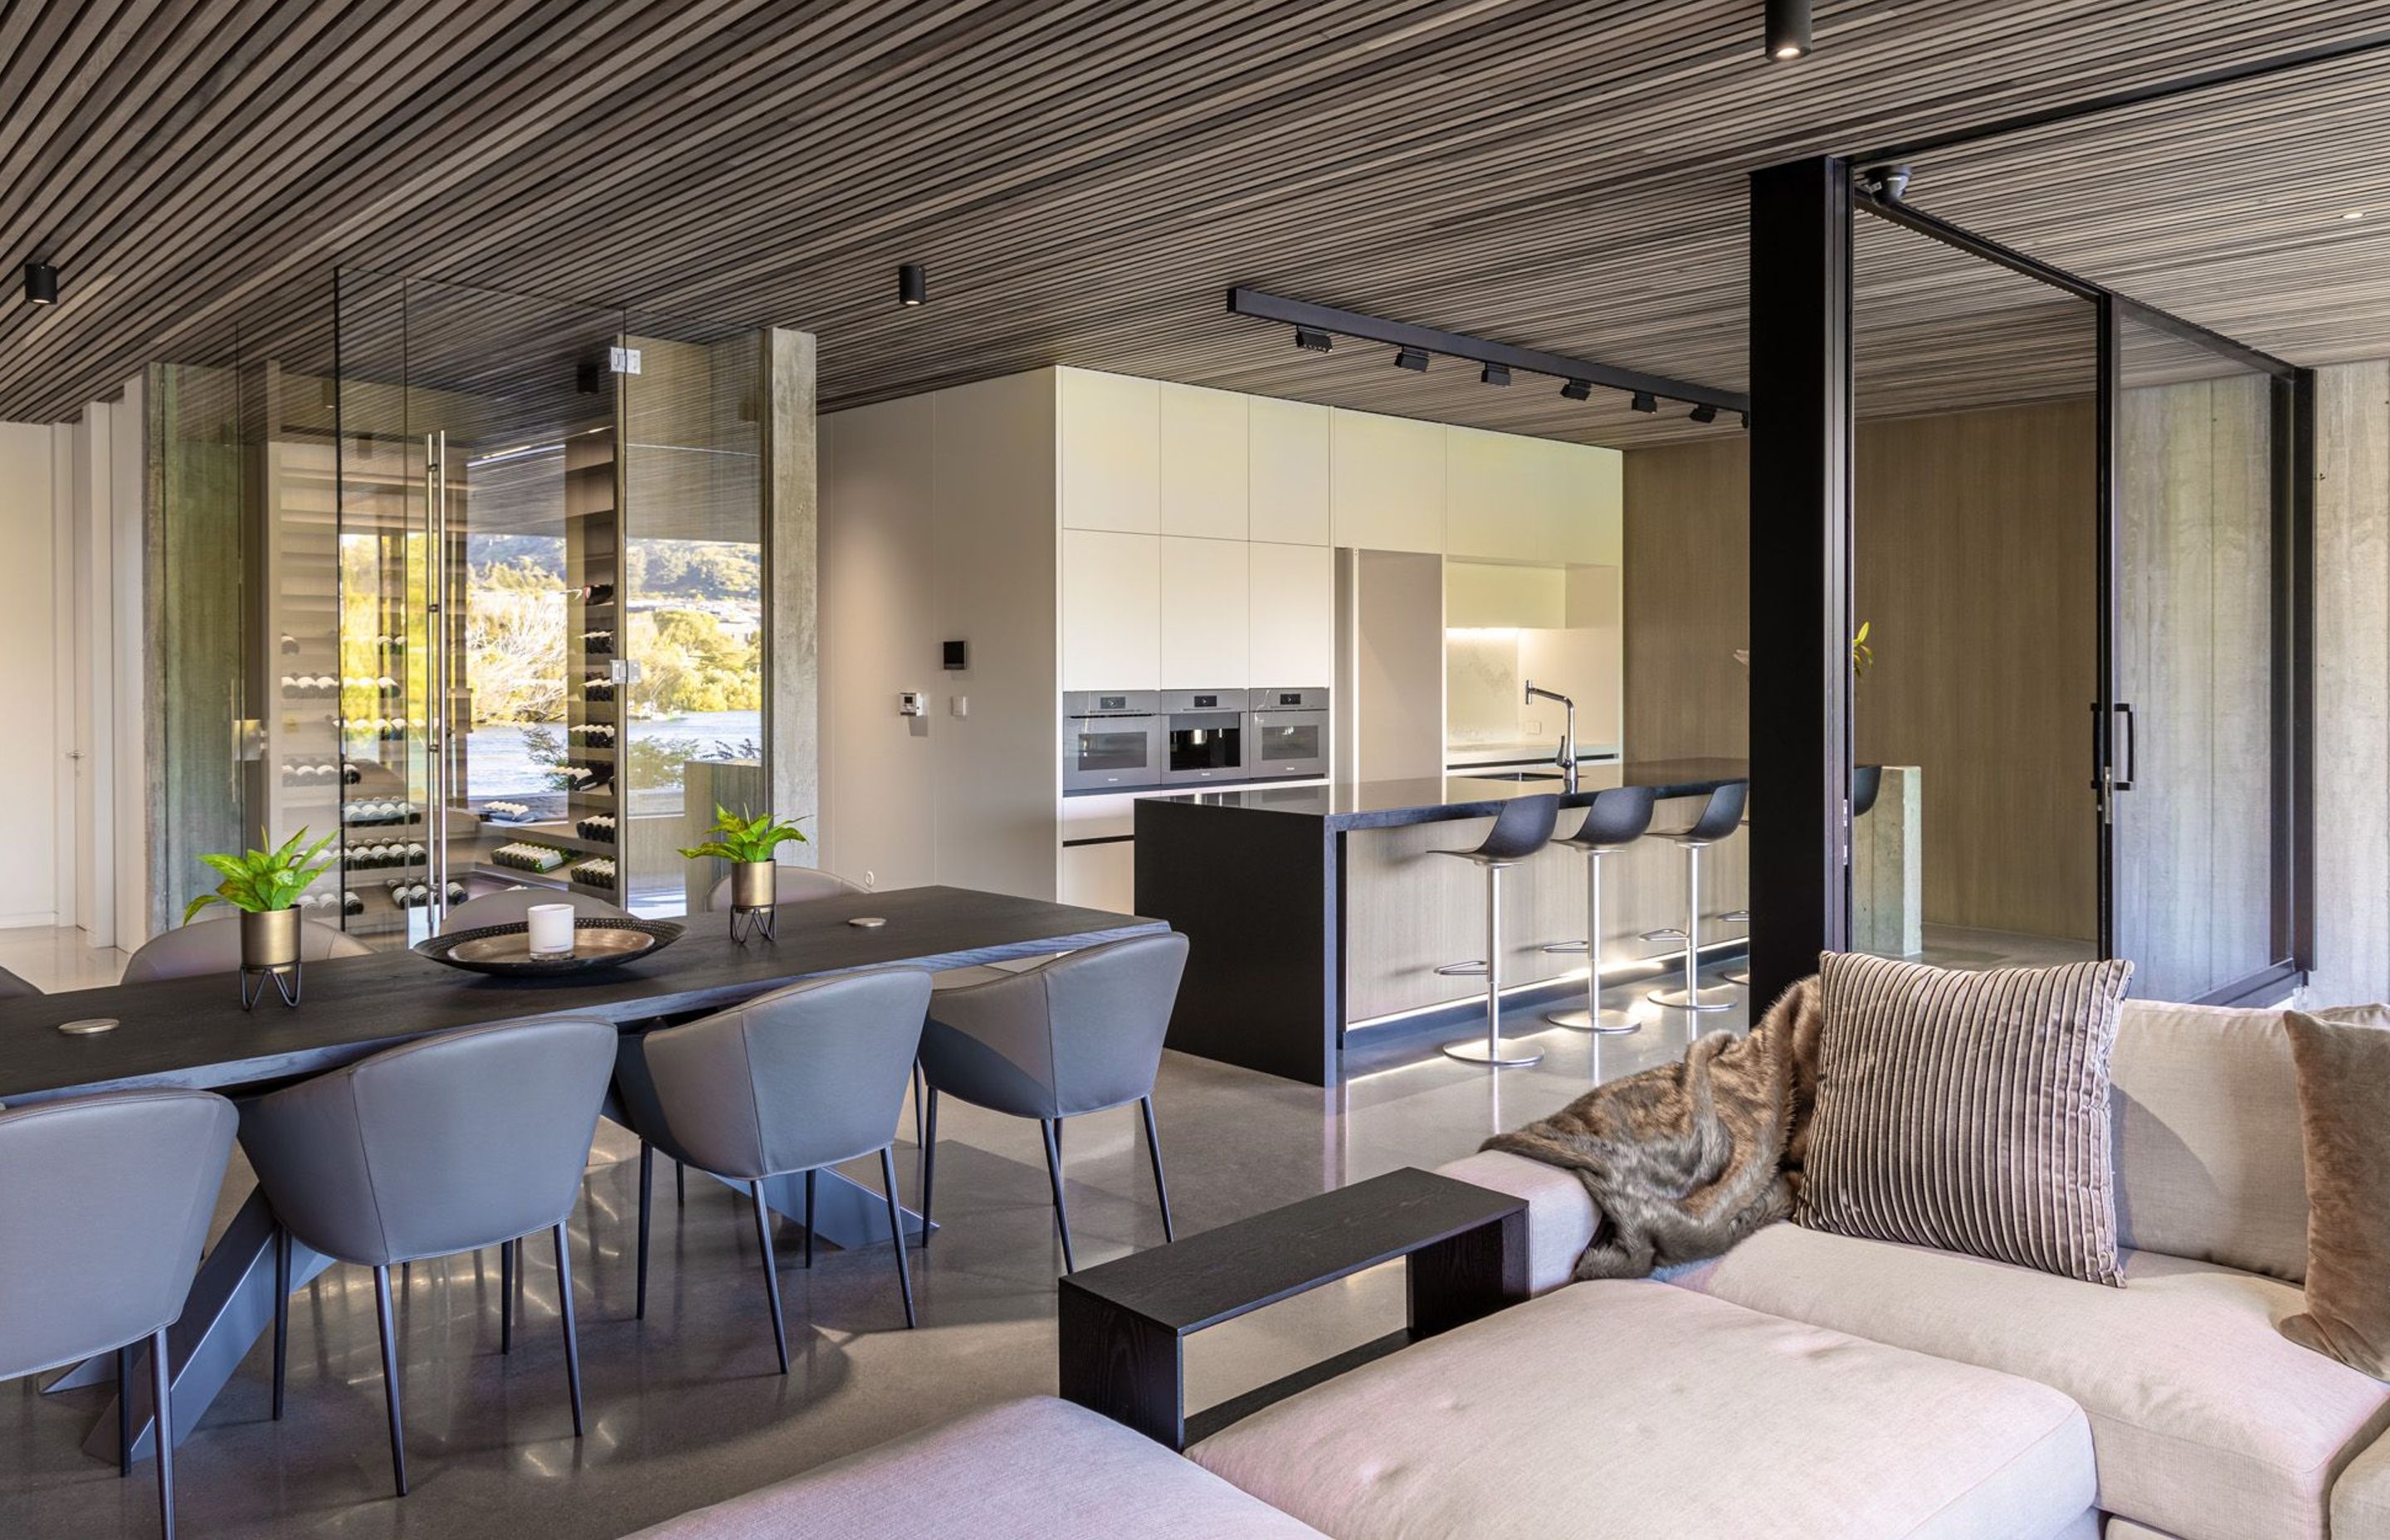 The L-shaped open-plan kitchen, living and dining area opens up into the outdoor room via large sliding doors.